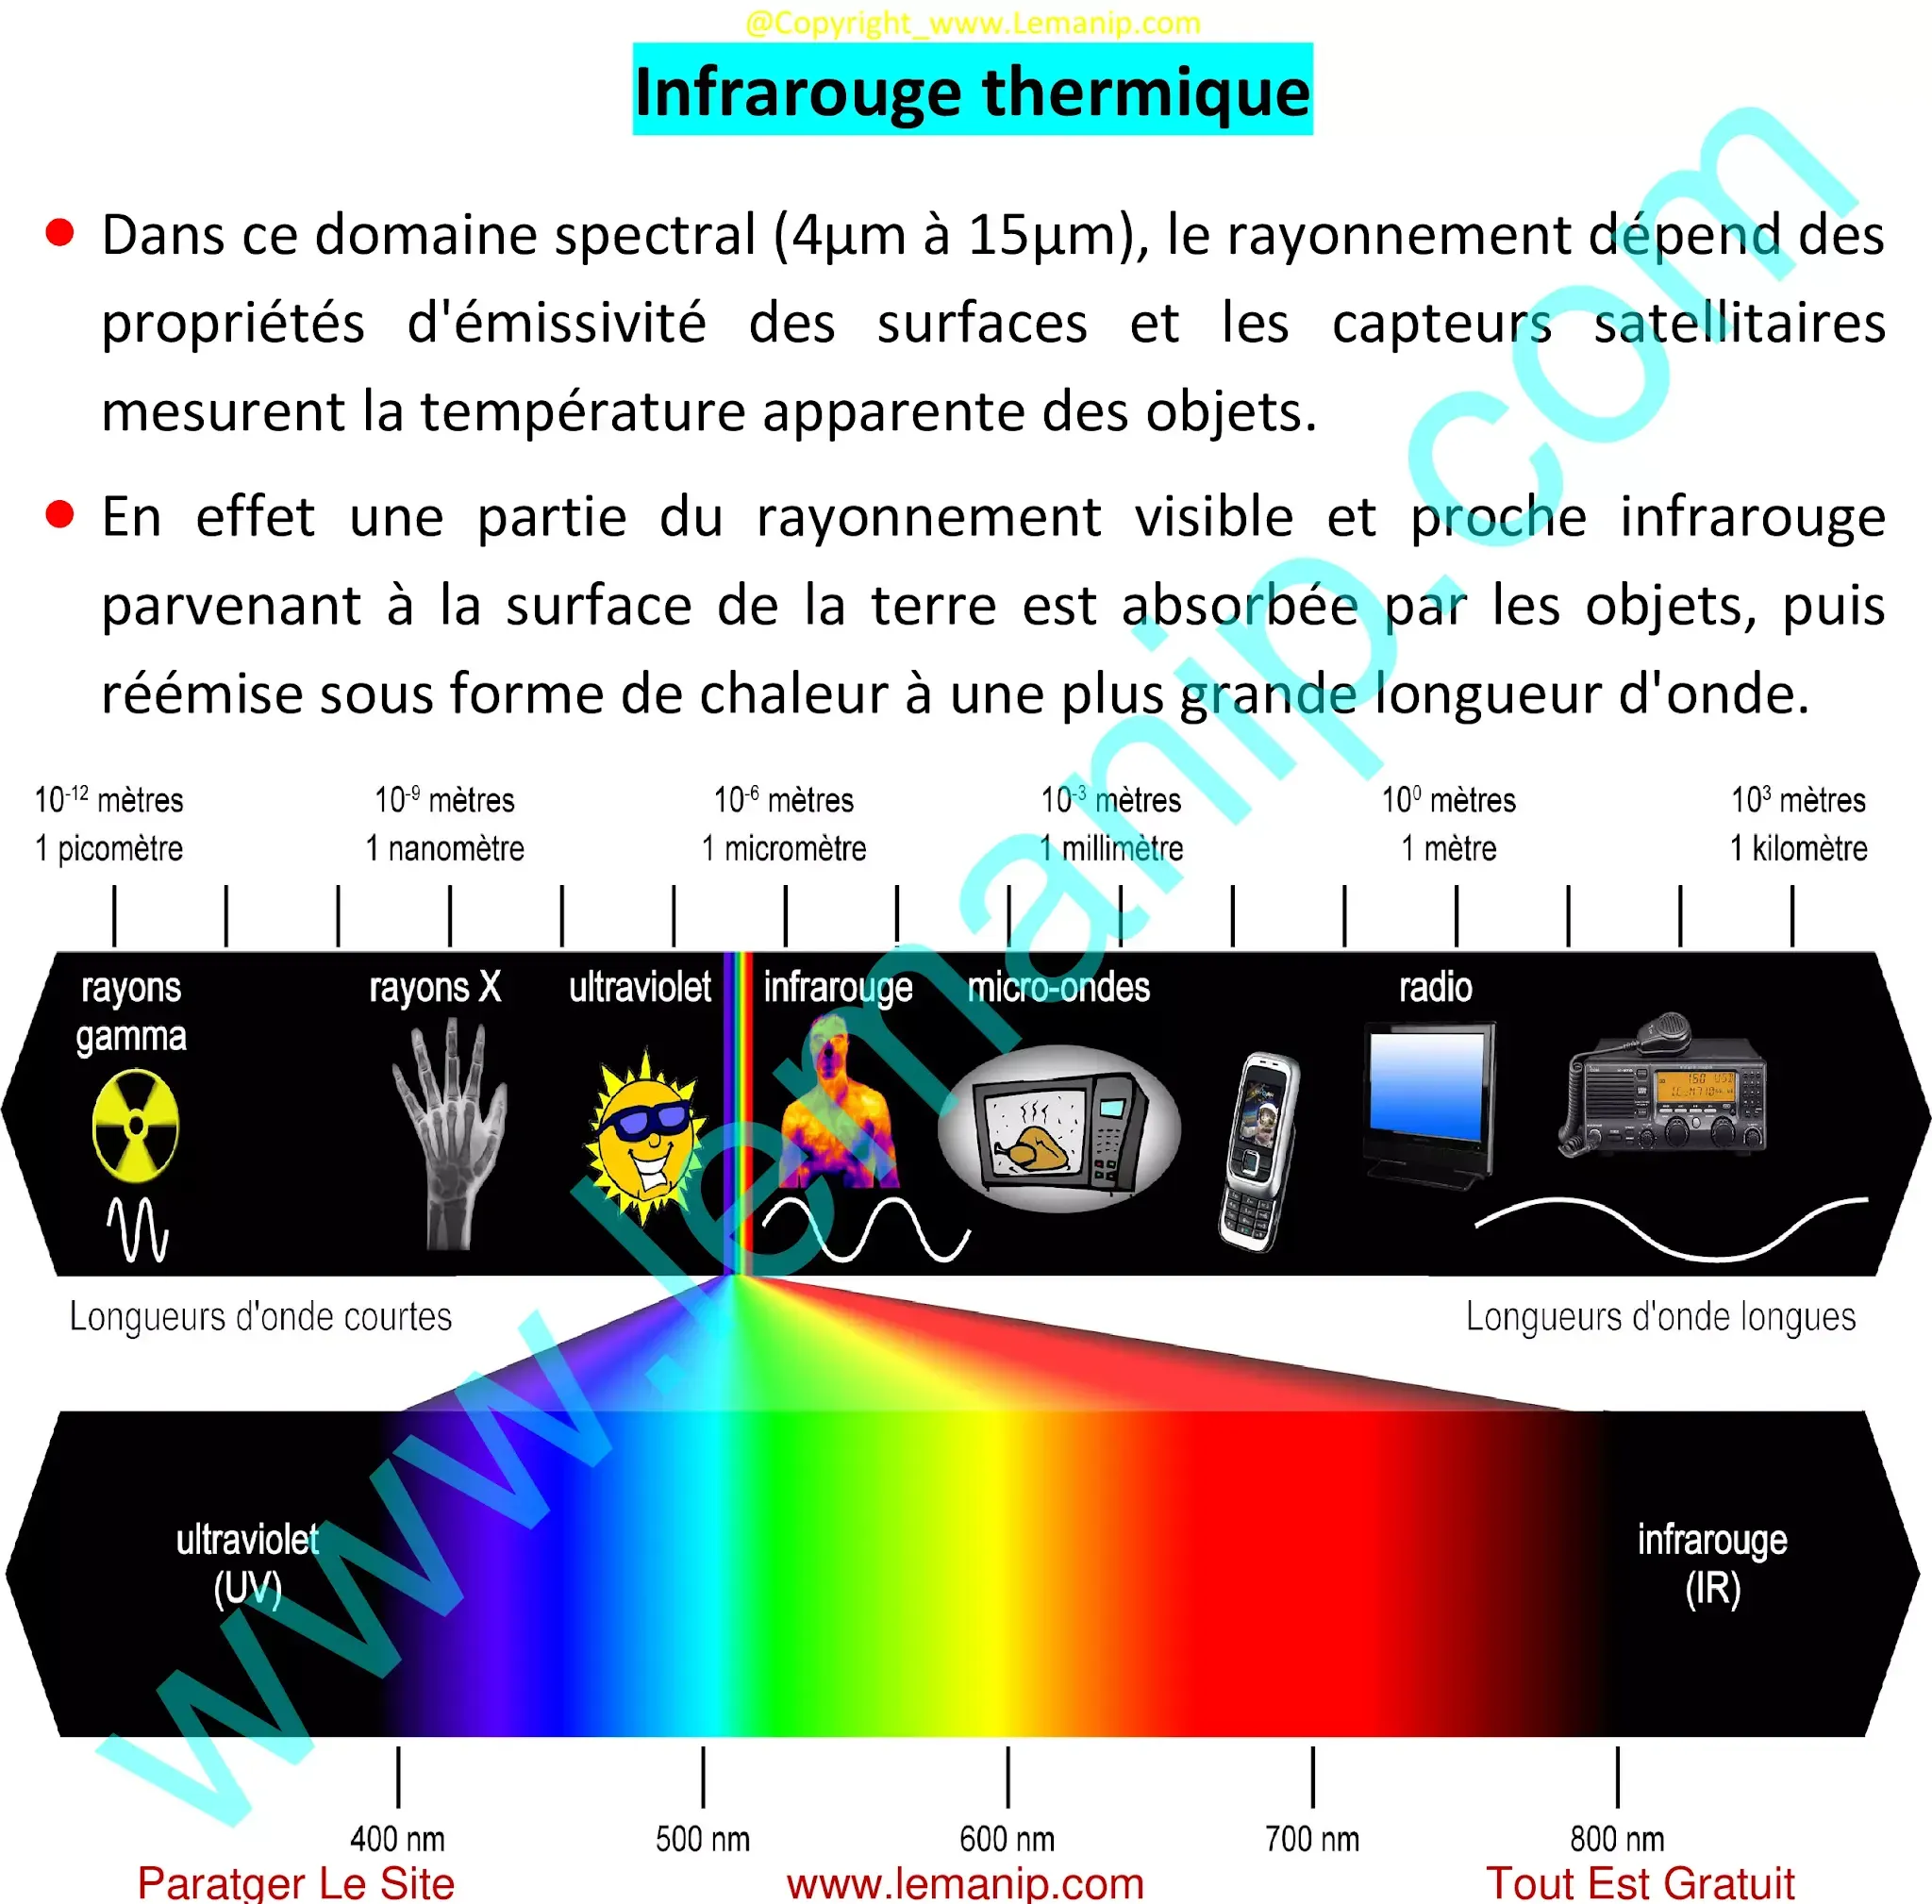 Infrarouge thermique